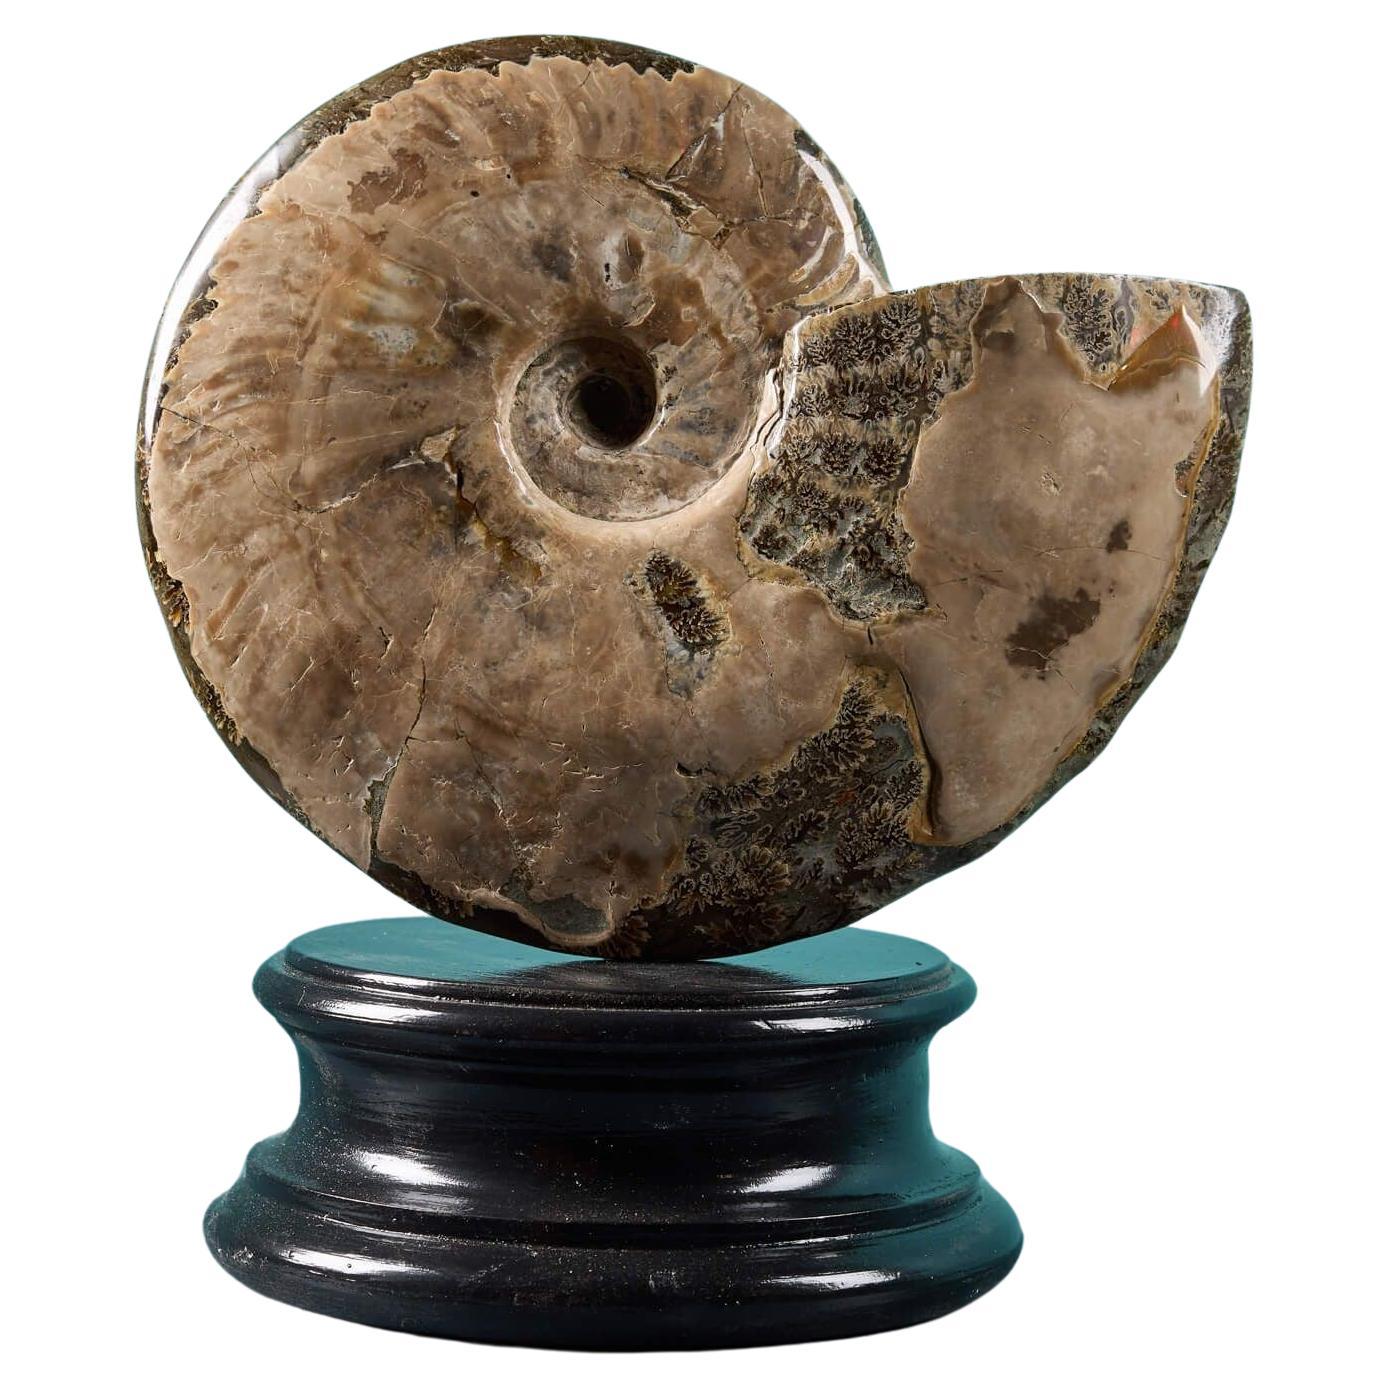 Opalised Iridescent Ammonite Fossil For Sale